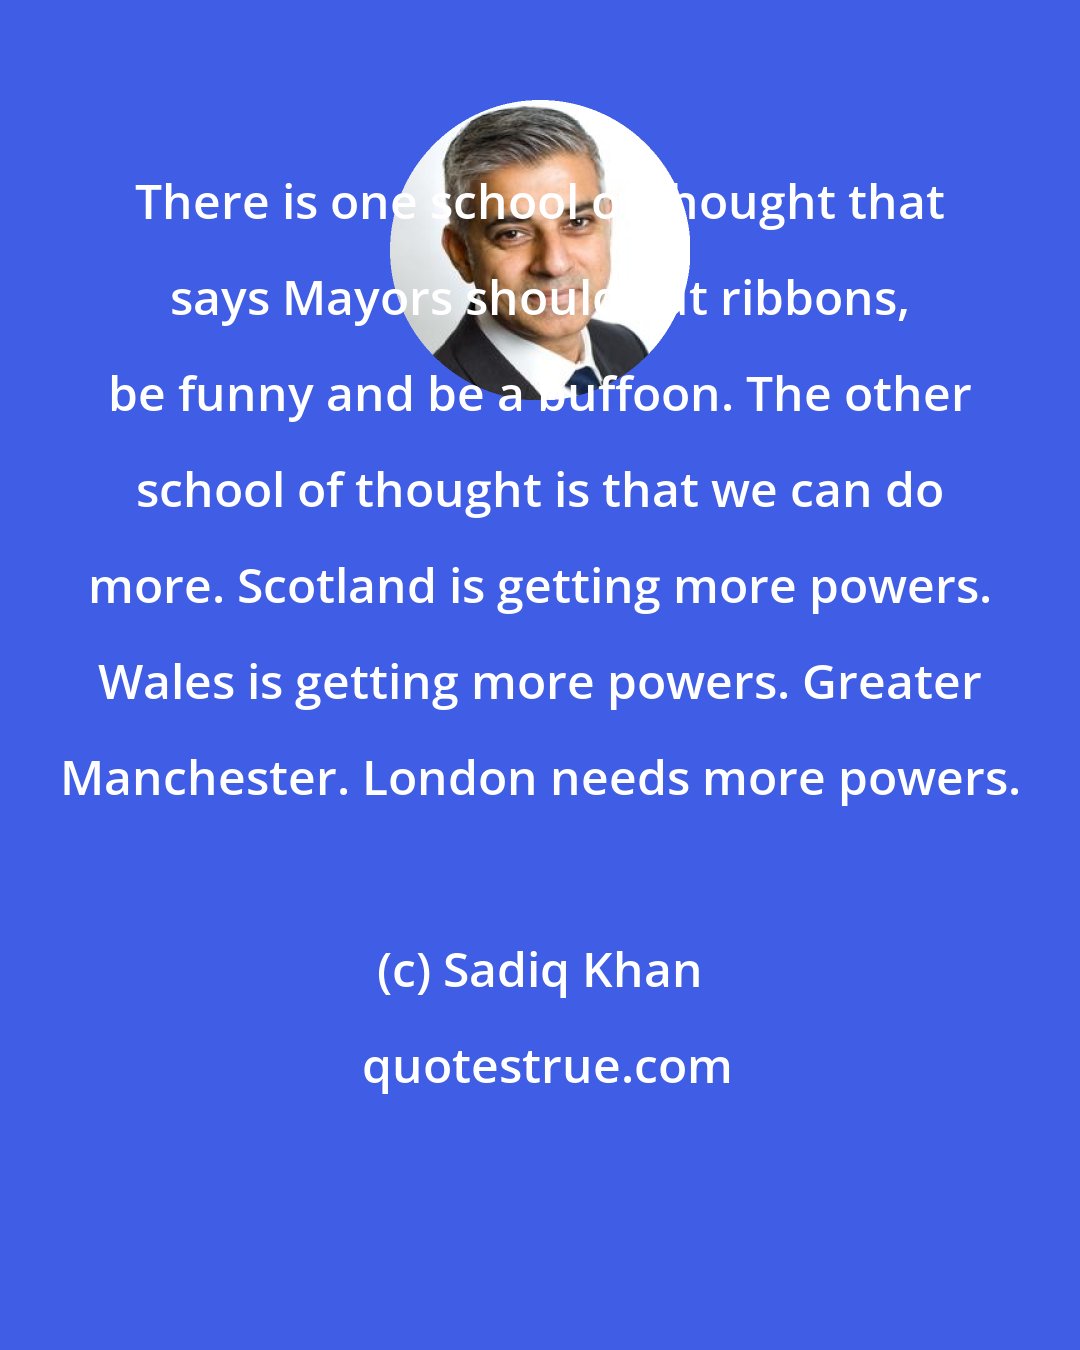 Sadiq Khan: There is one school of thought that says Mayors should cut ribbons, be funny and be a buffoon. The other school of thought is that we can do more. Scotland is getting more powers. Wales is getting more powers. Greater Manchester. London needs more powers.